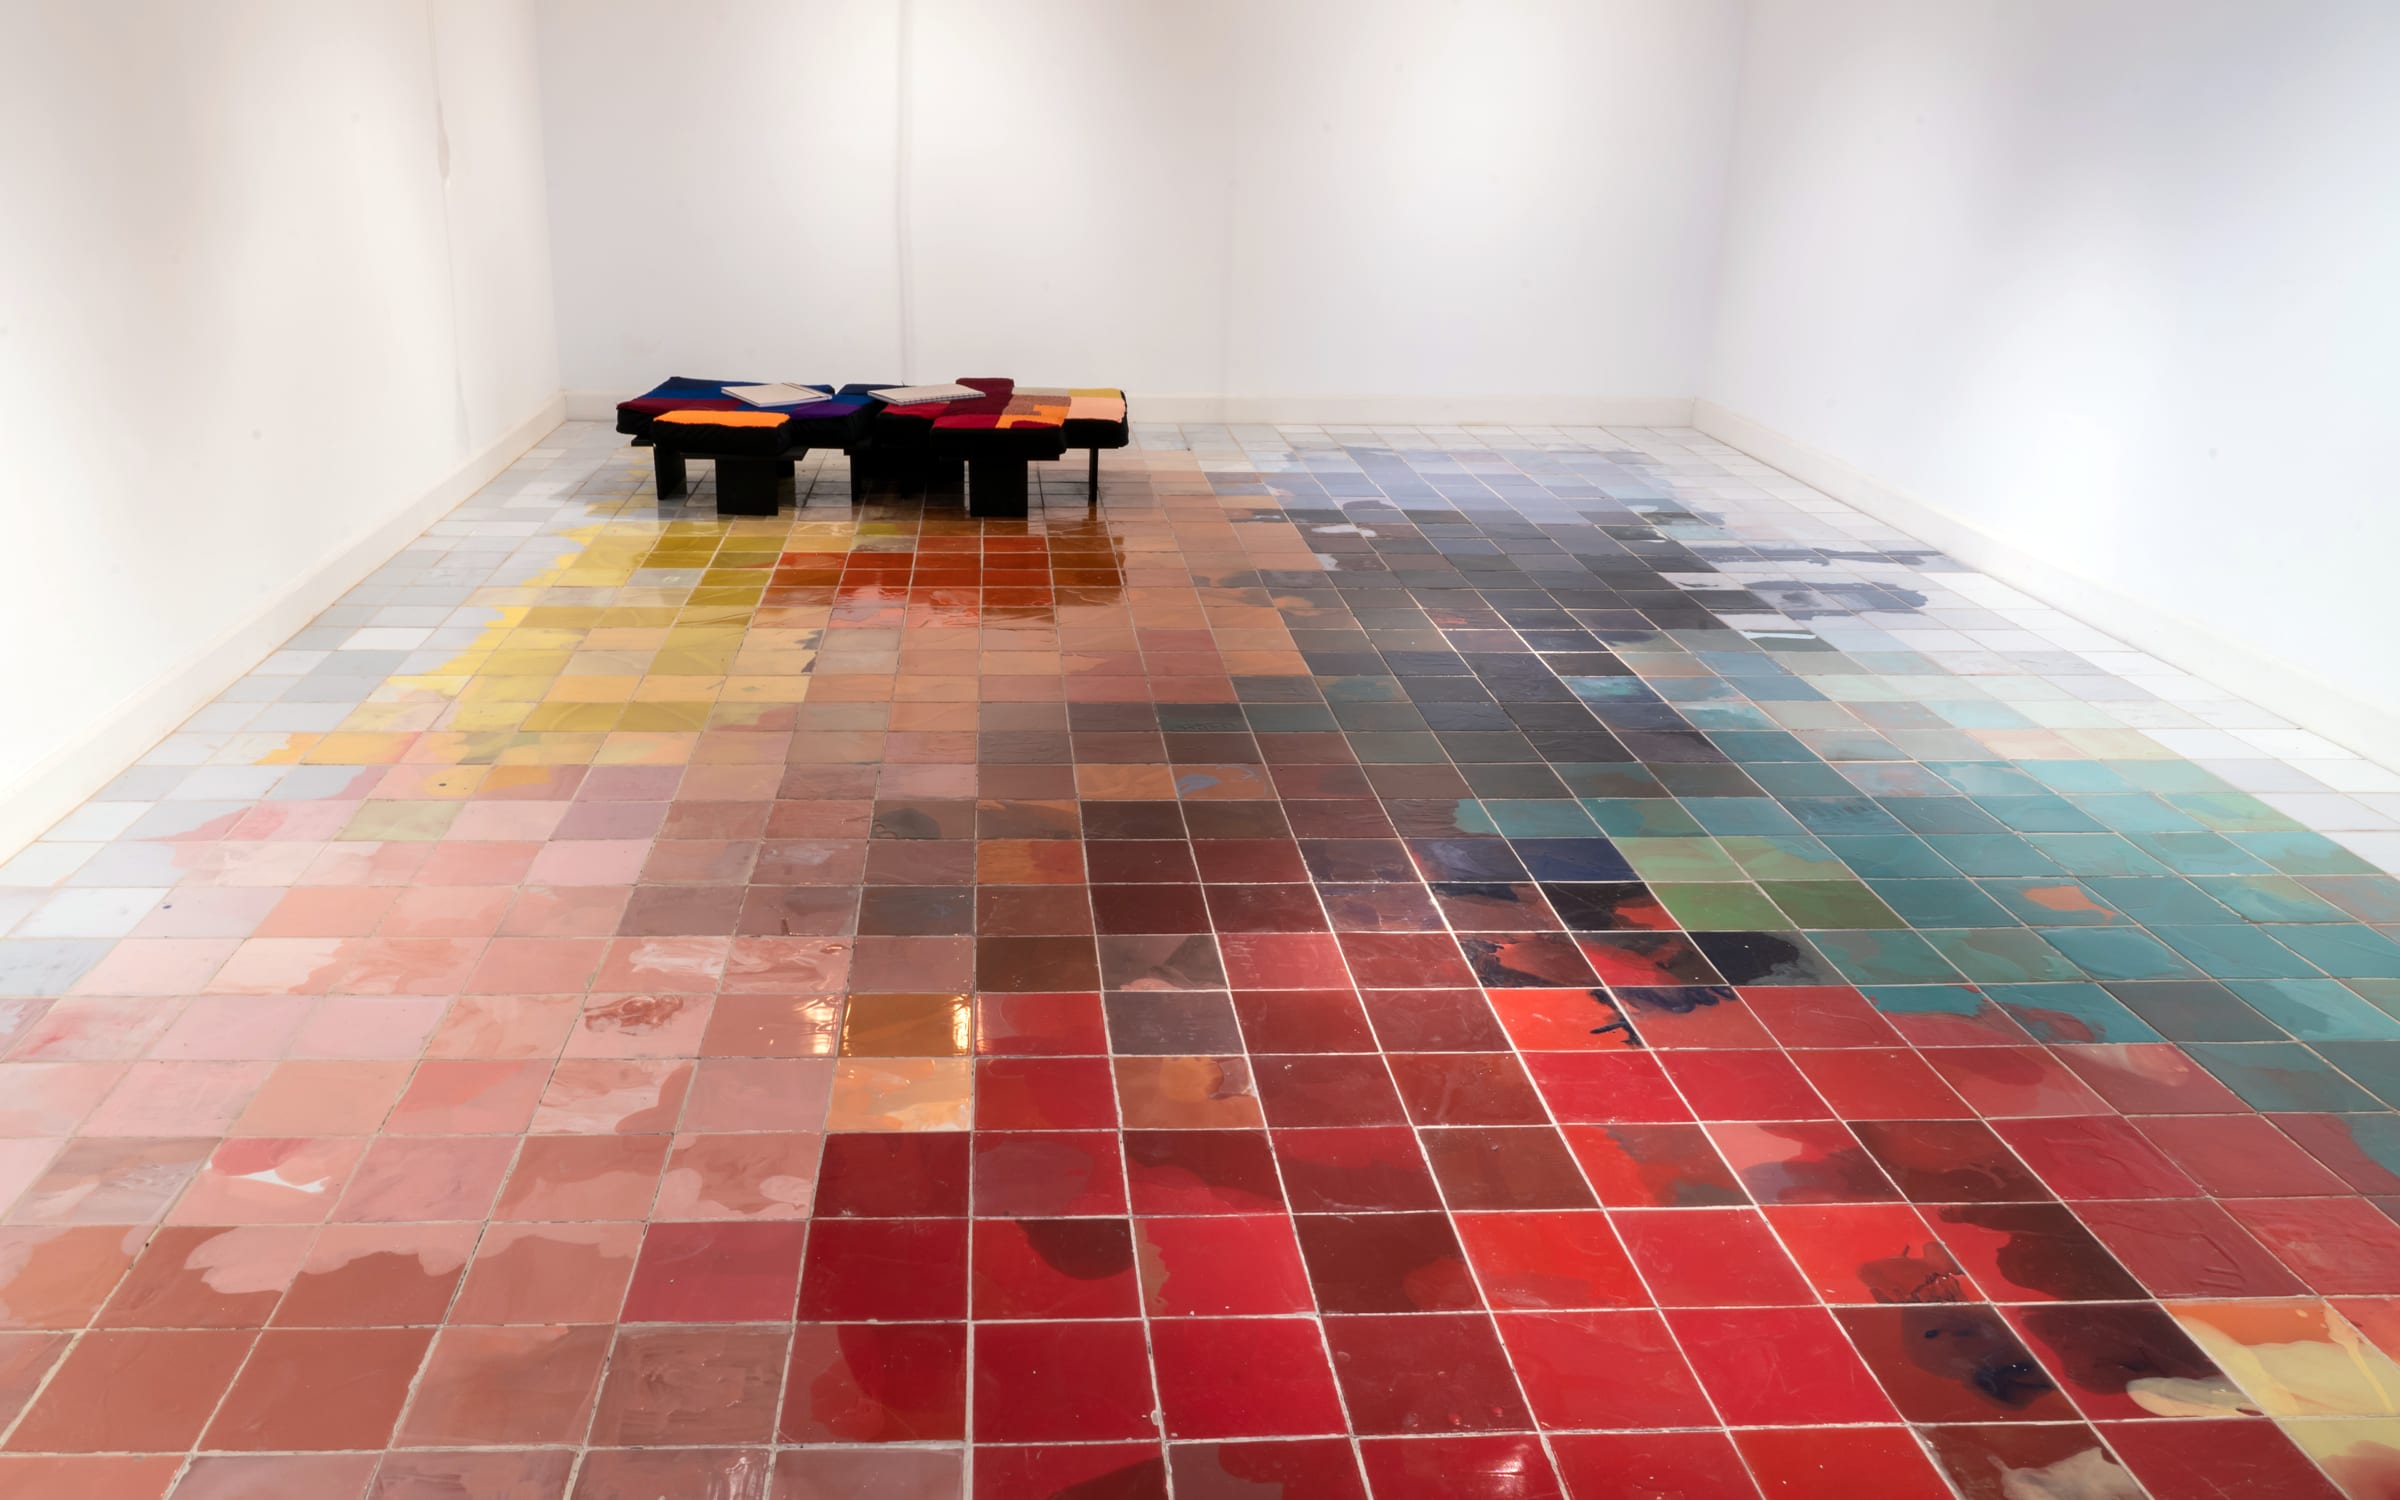 As part of Marina De Caro’s exhibition at Museo de la Inmigración in late 2018, Cromoactivismo painted the floor in a new spectrum of shades that overlapped the tiles’ borders. The installation served as a reading room for the group’s first publication. Image courtesy of the artists. Photo courtesy of UNTREF Media.